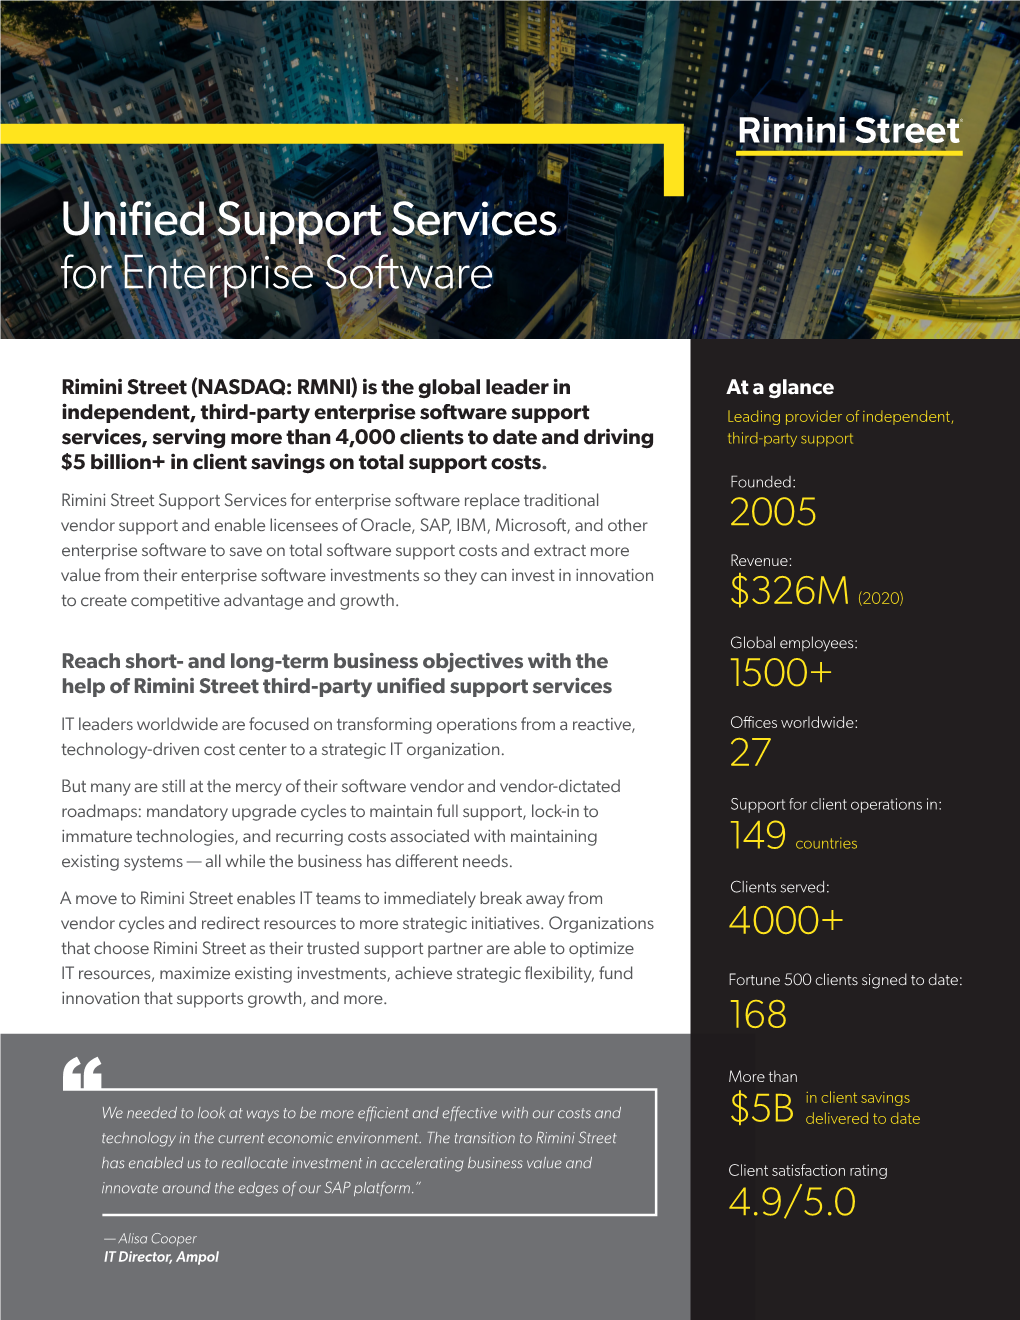 Unified Support Services for Enterprise Software | Rimini Street